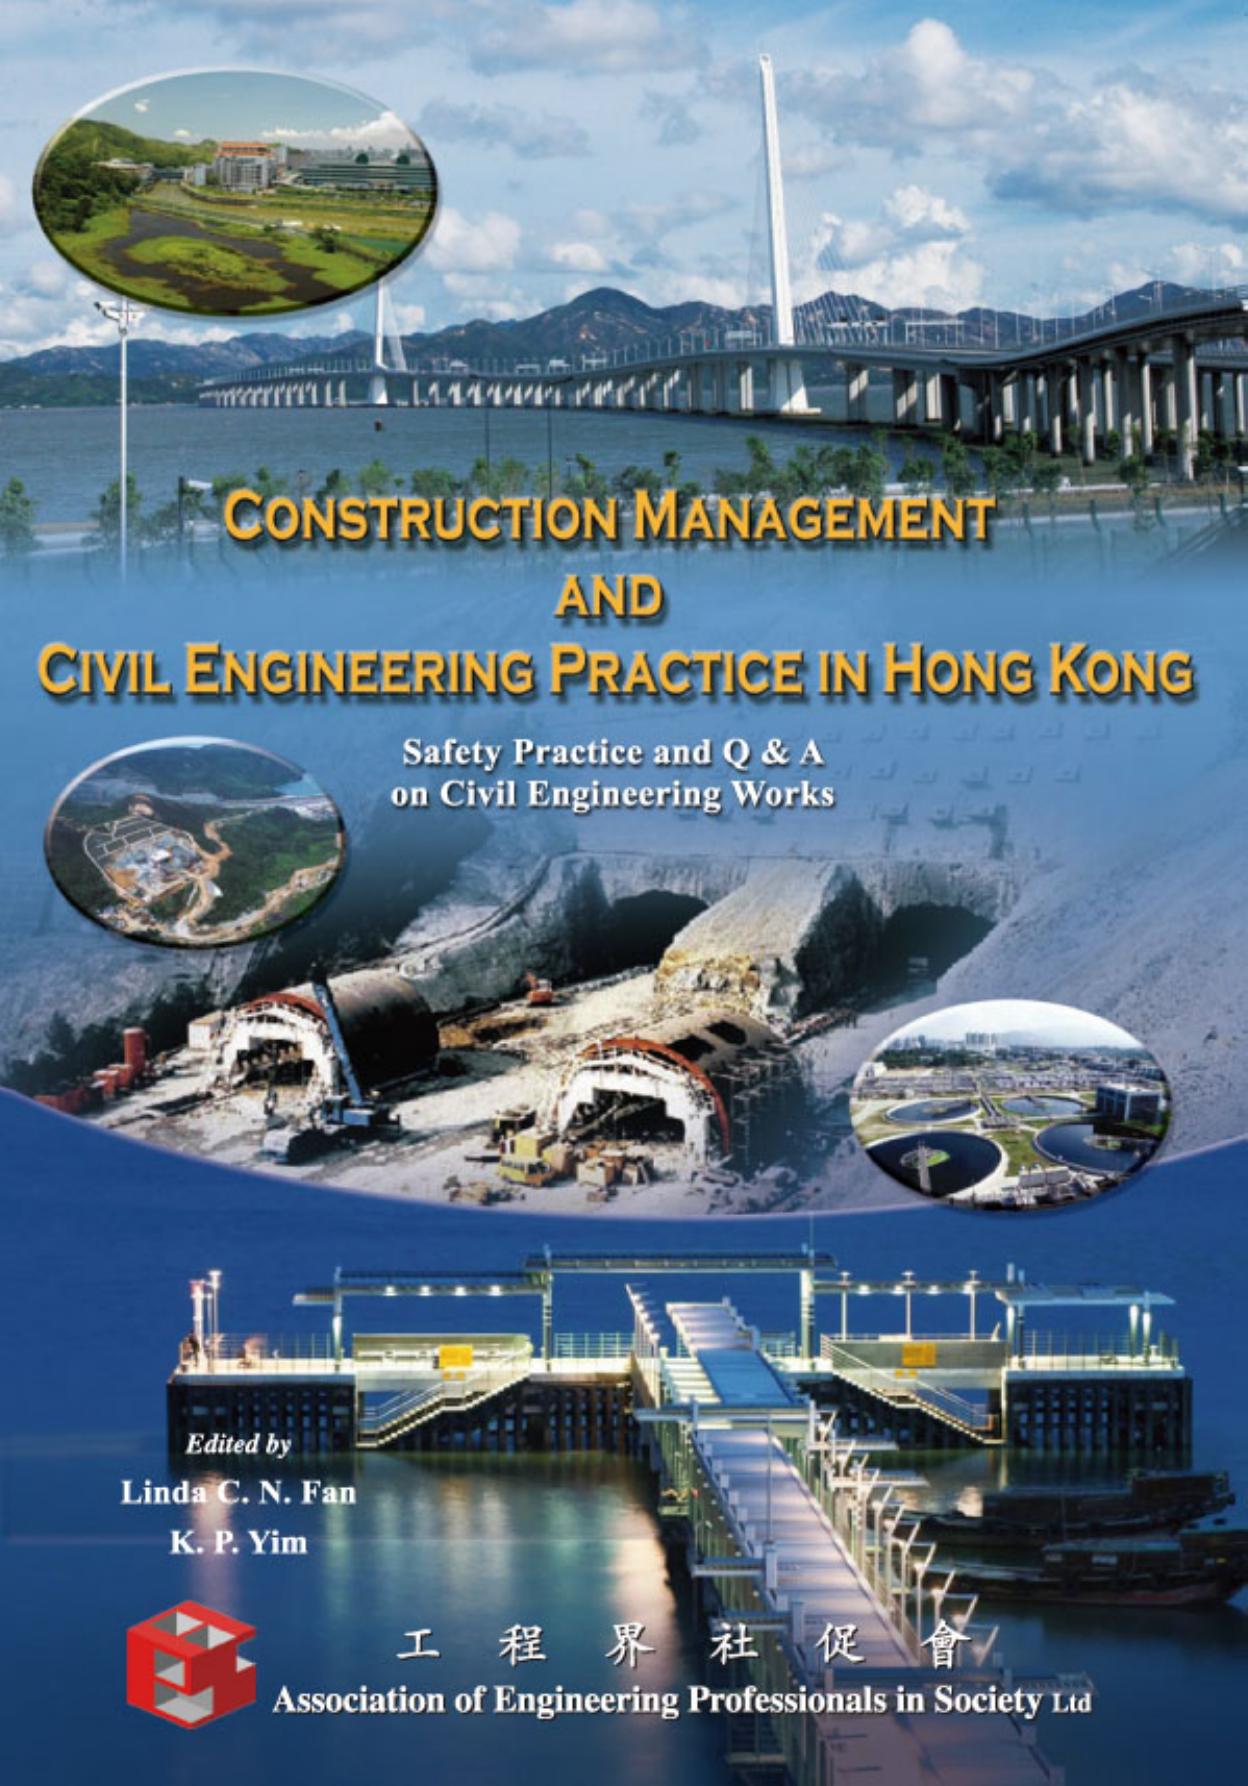 Construction management and Civil Engineering Practice in Hong Kong